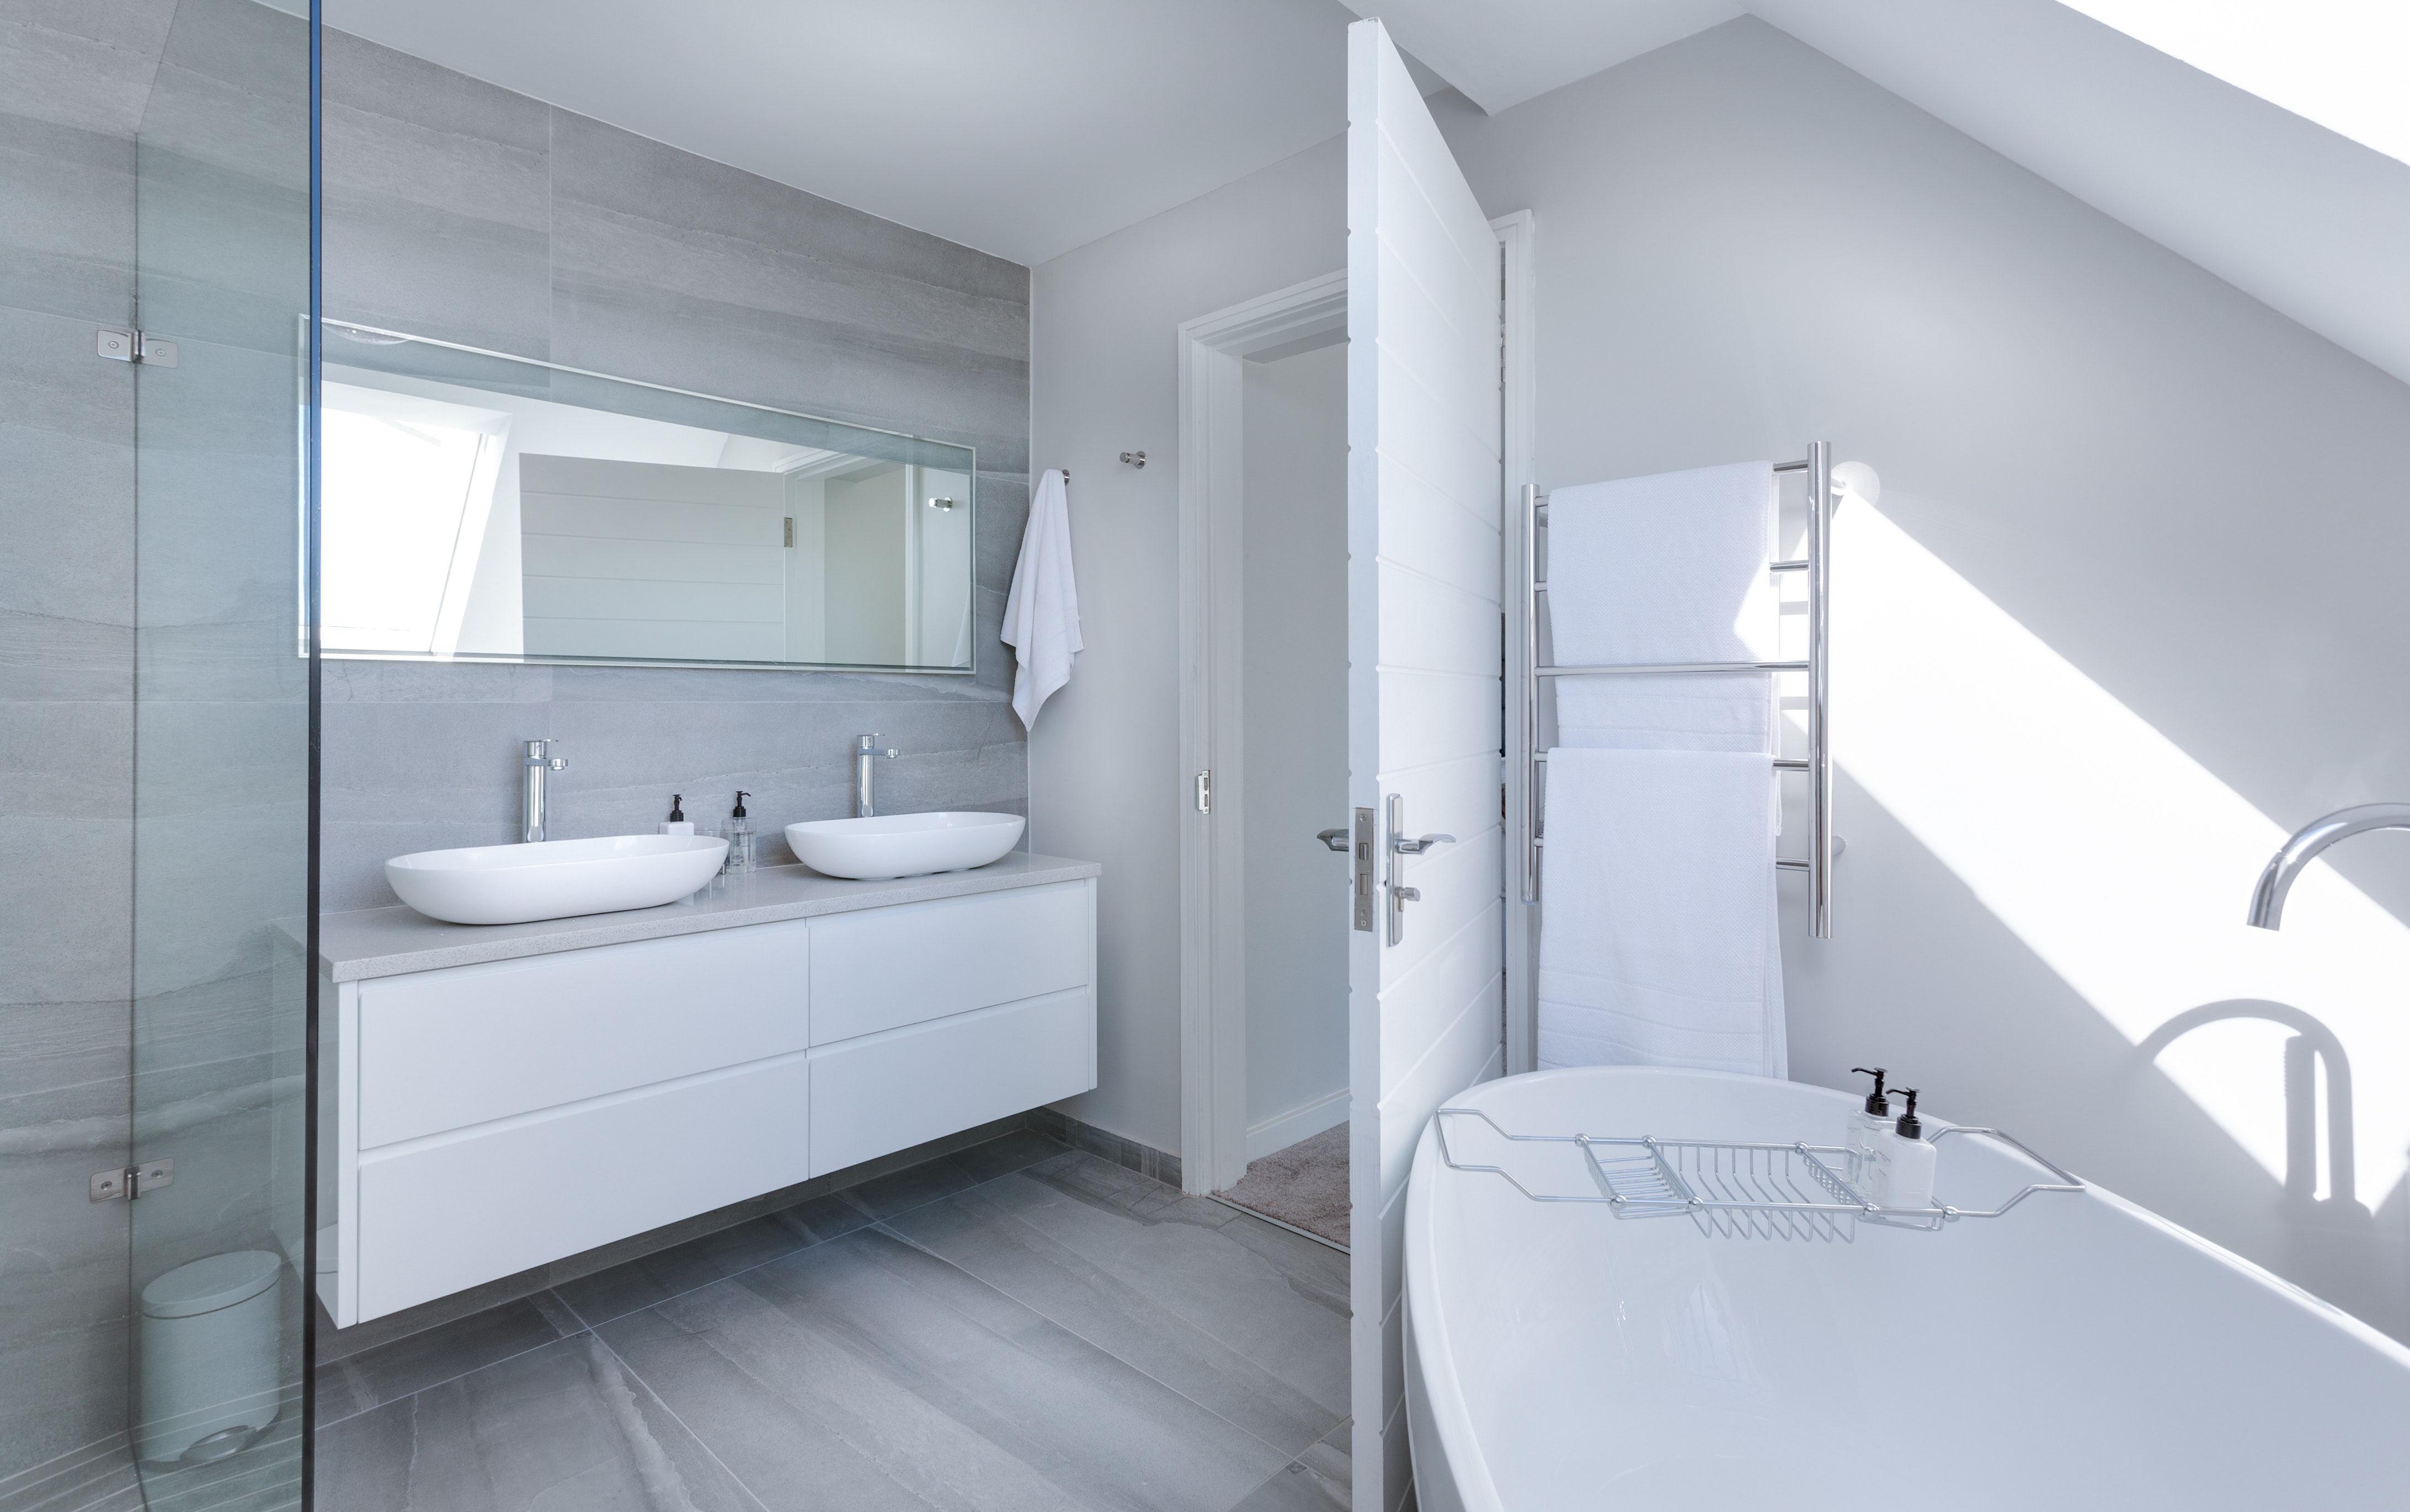 4 Reasons to Remodel Your Bathroom